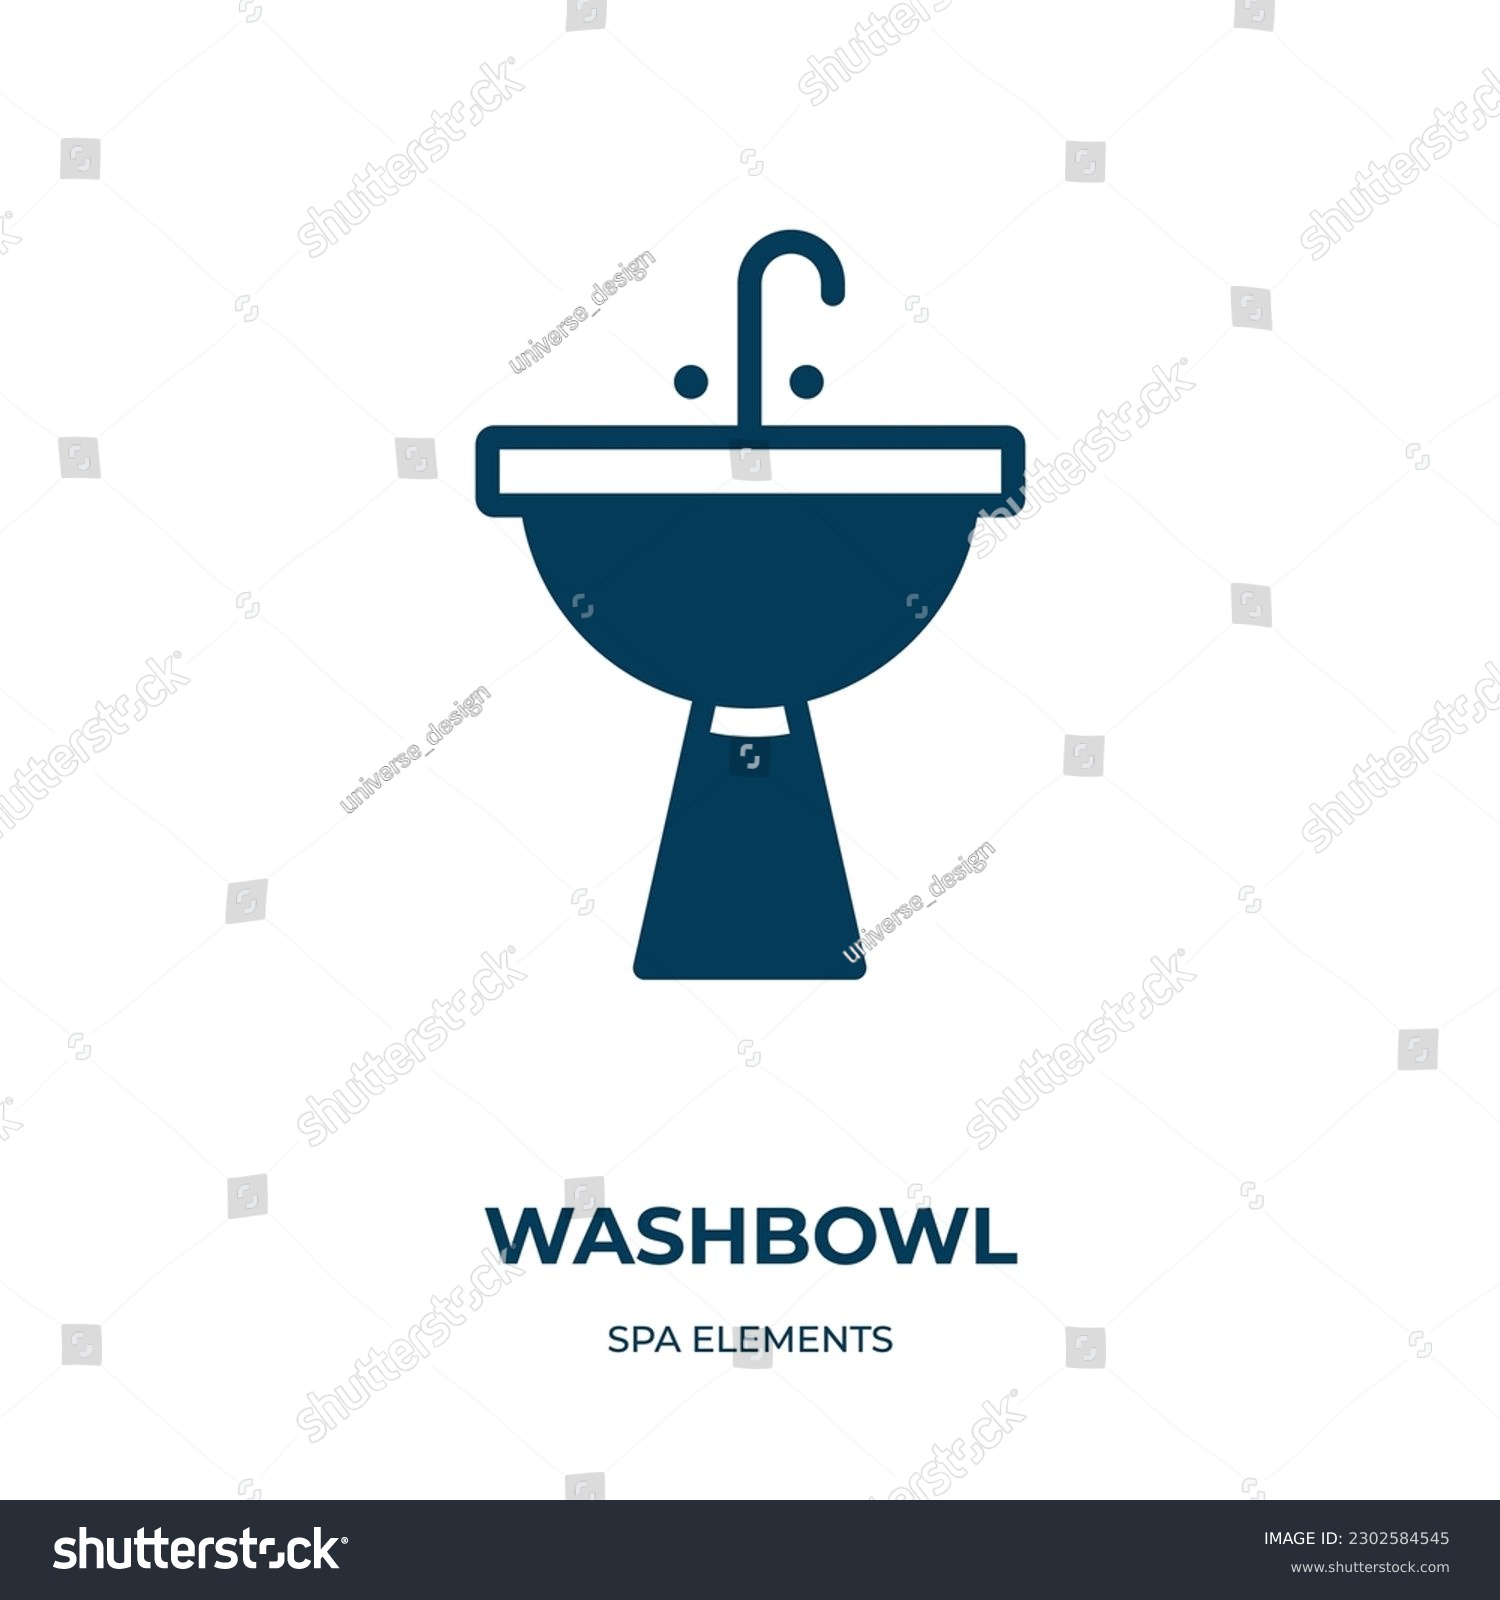 SVG of washbowl vector icon. washbowl, water, hygiene filled icons from flat spa elements concept. Isolated black glyph icon, vector illustration symbol element for web design and mobile apps svg